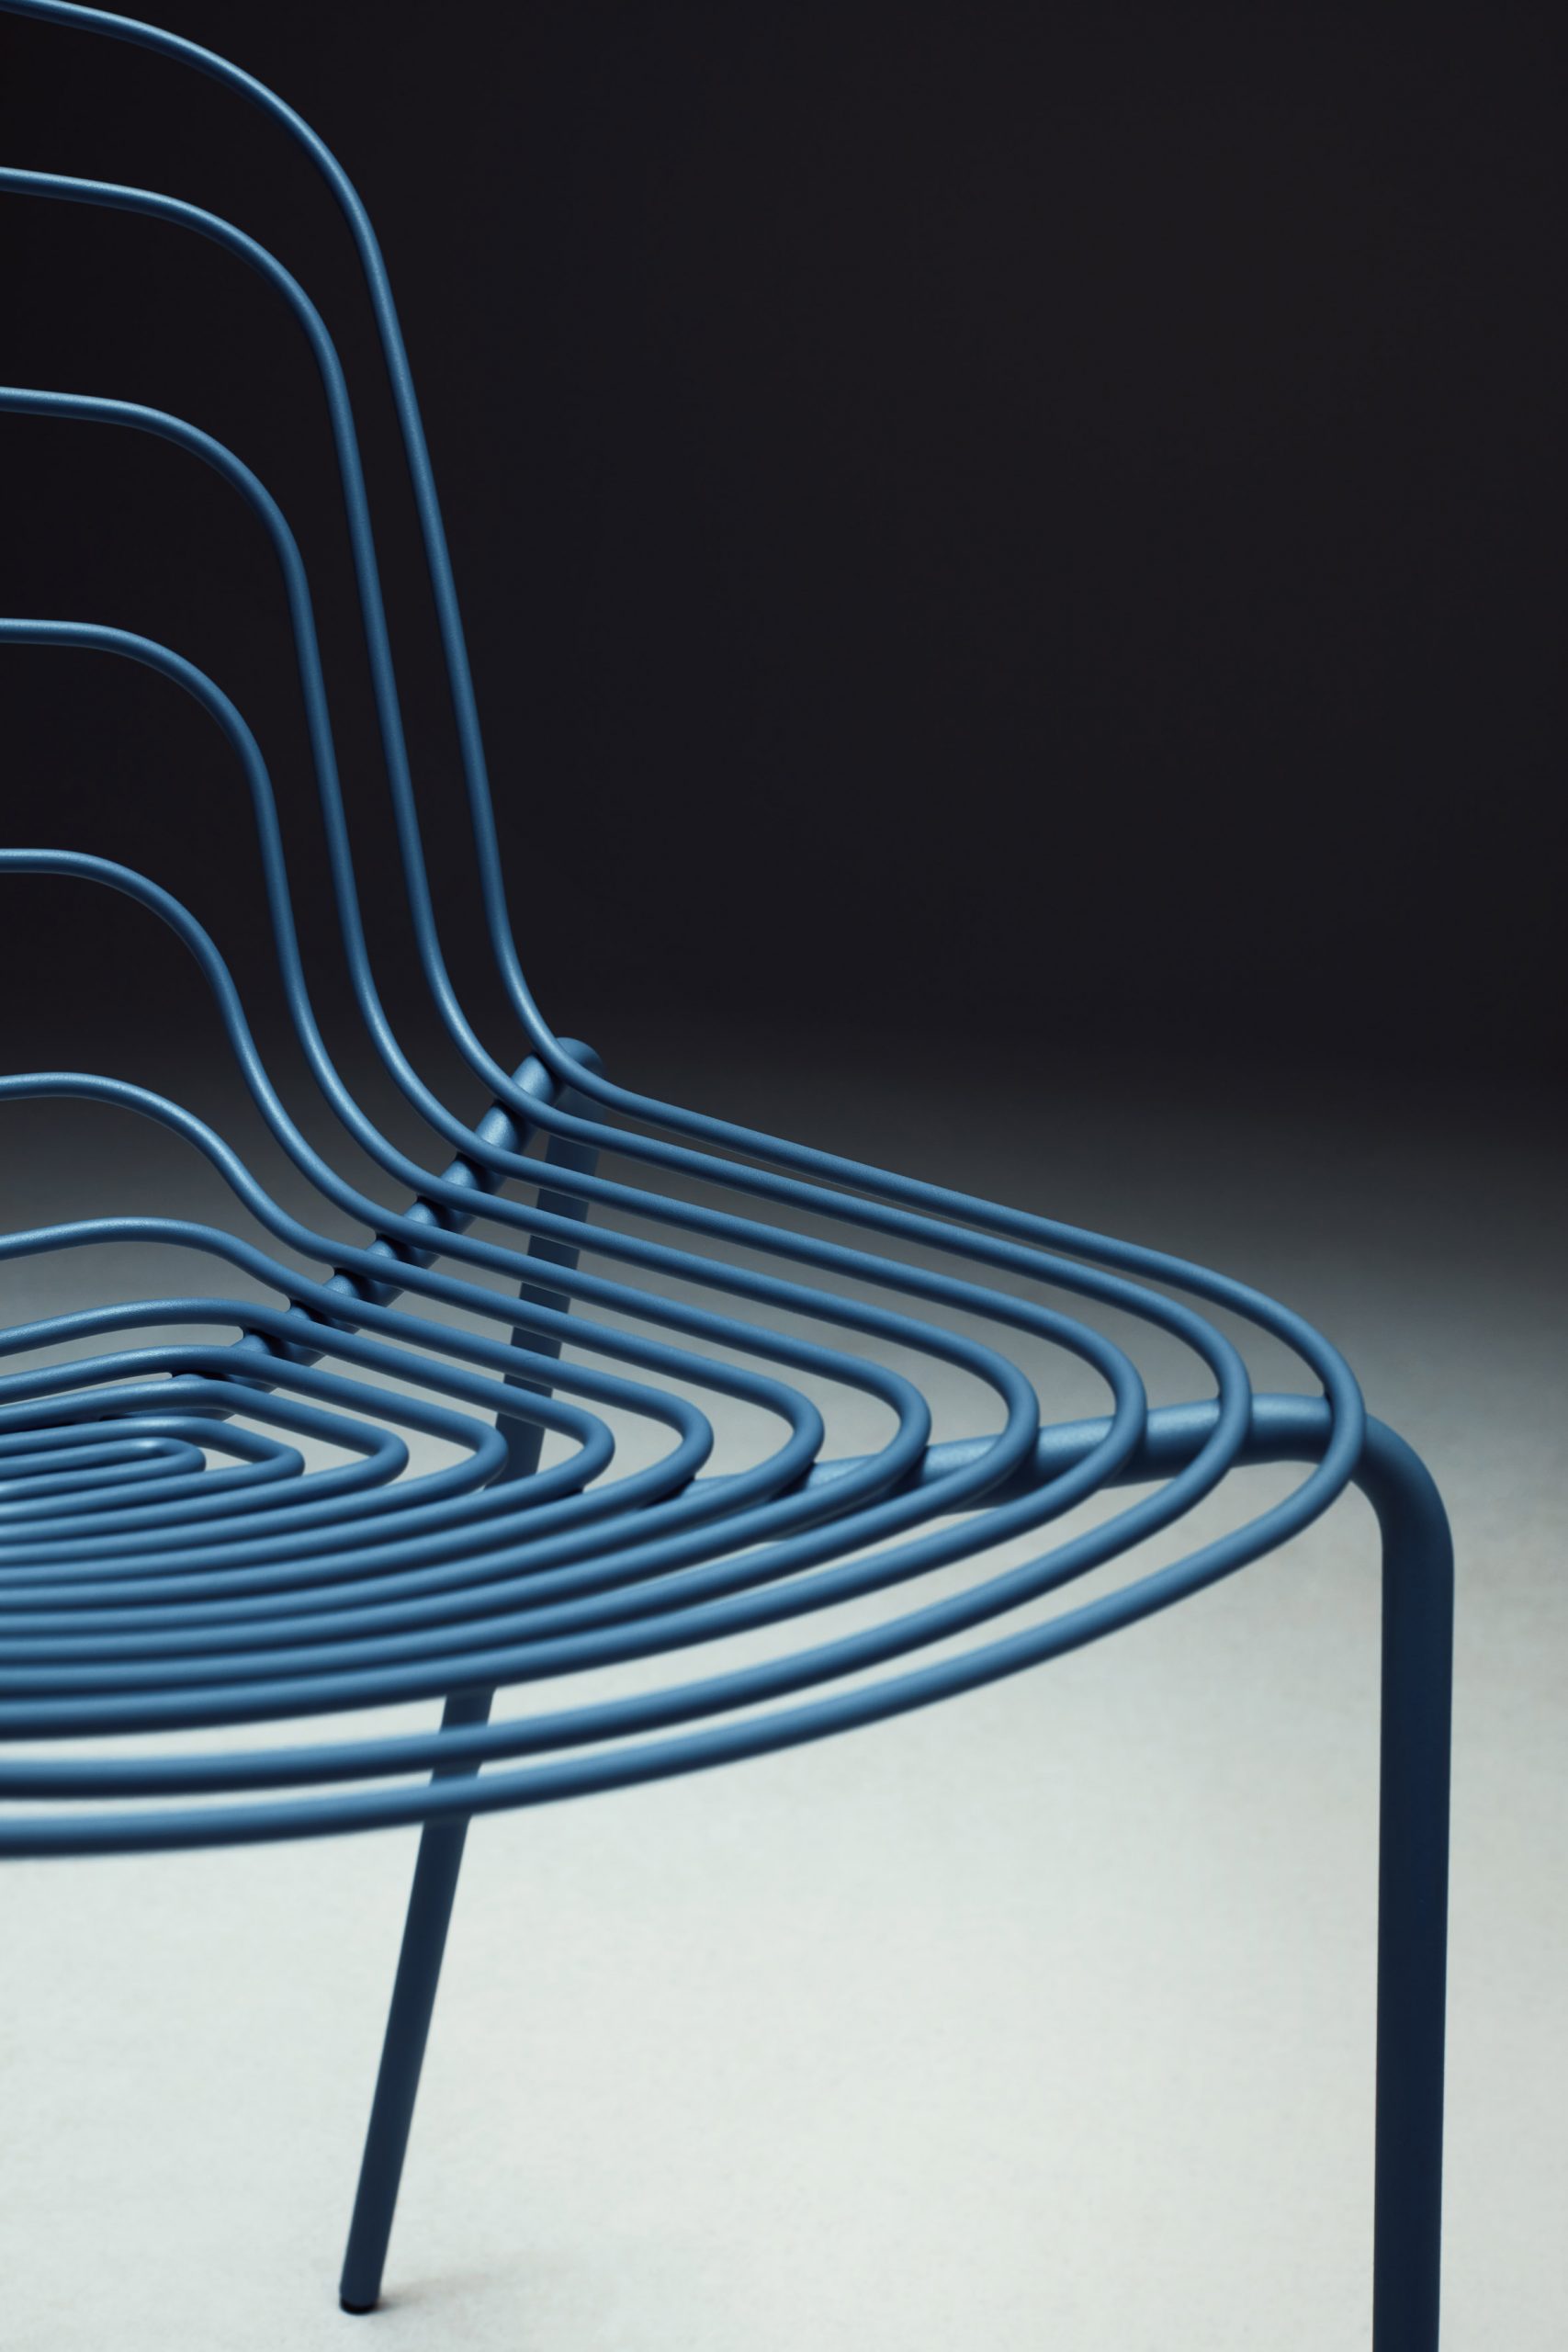 The Wired Chair, designed by Michael Young - Core77